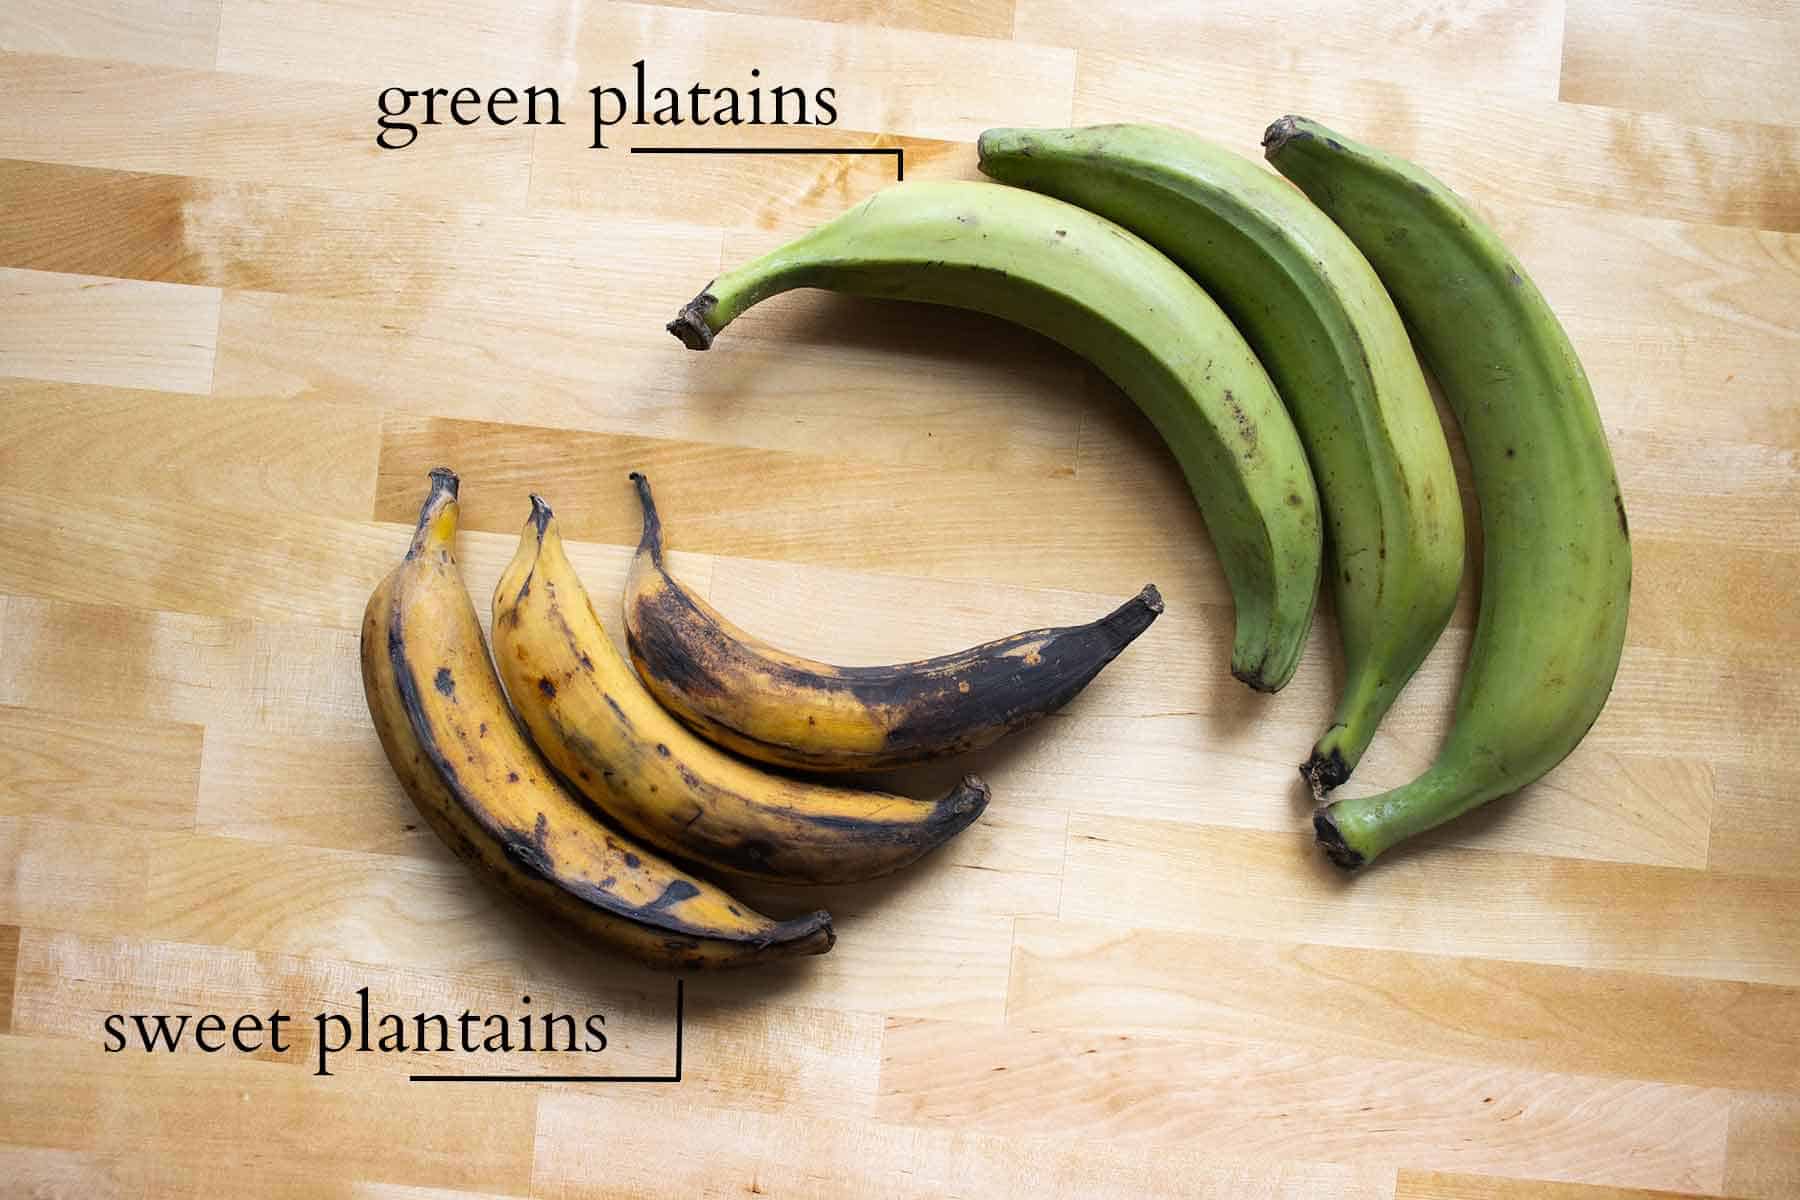 ripe and green plantains labeled on a table.